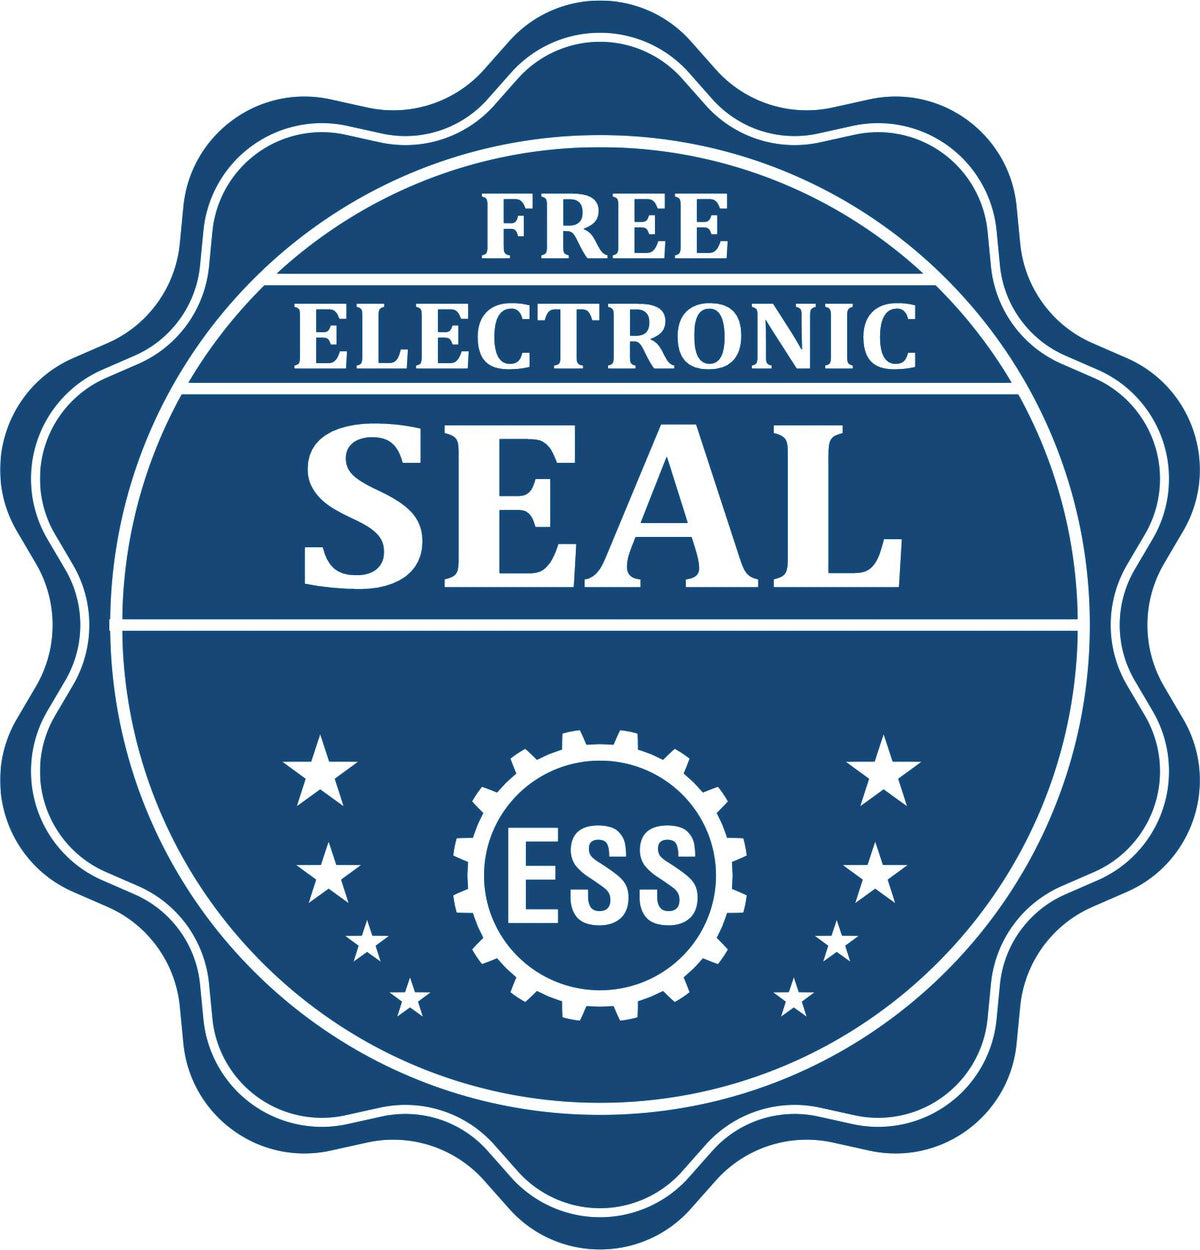 A badge showing a free electronic seal for the Slim Pre-Inked State Seal Notary Stamp for New Hampshire with stars and the ESS gear on the emblem.